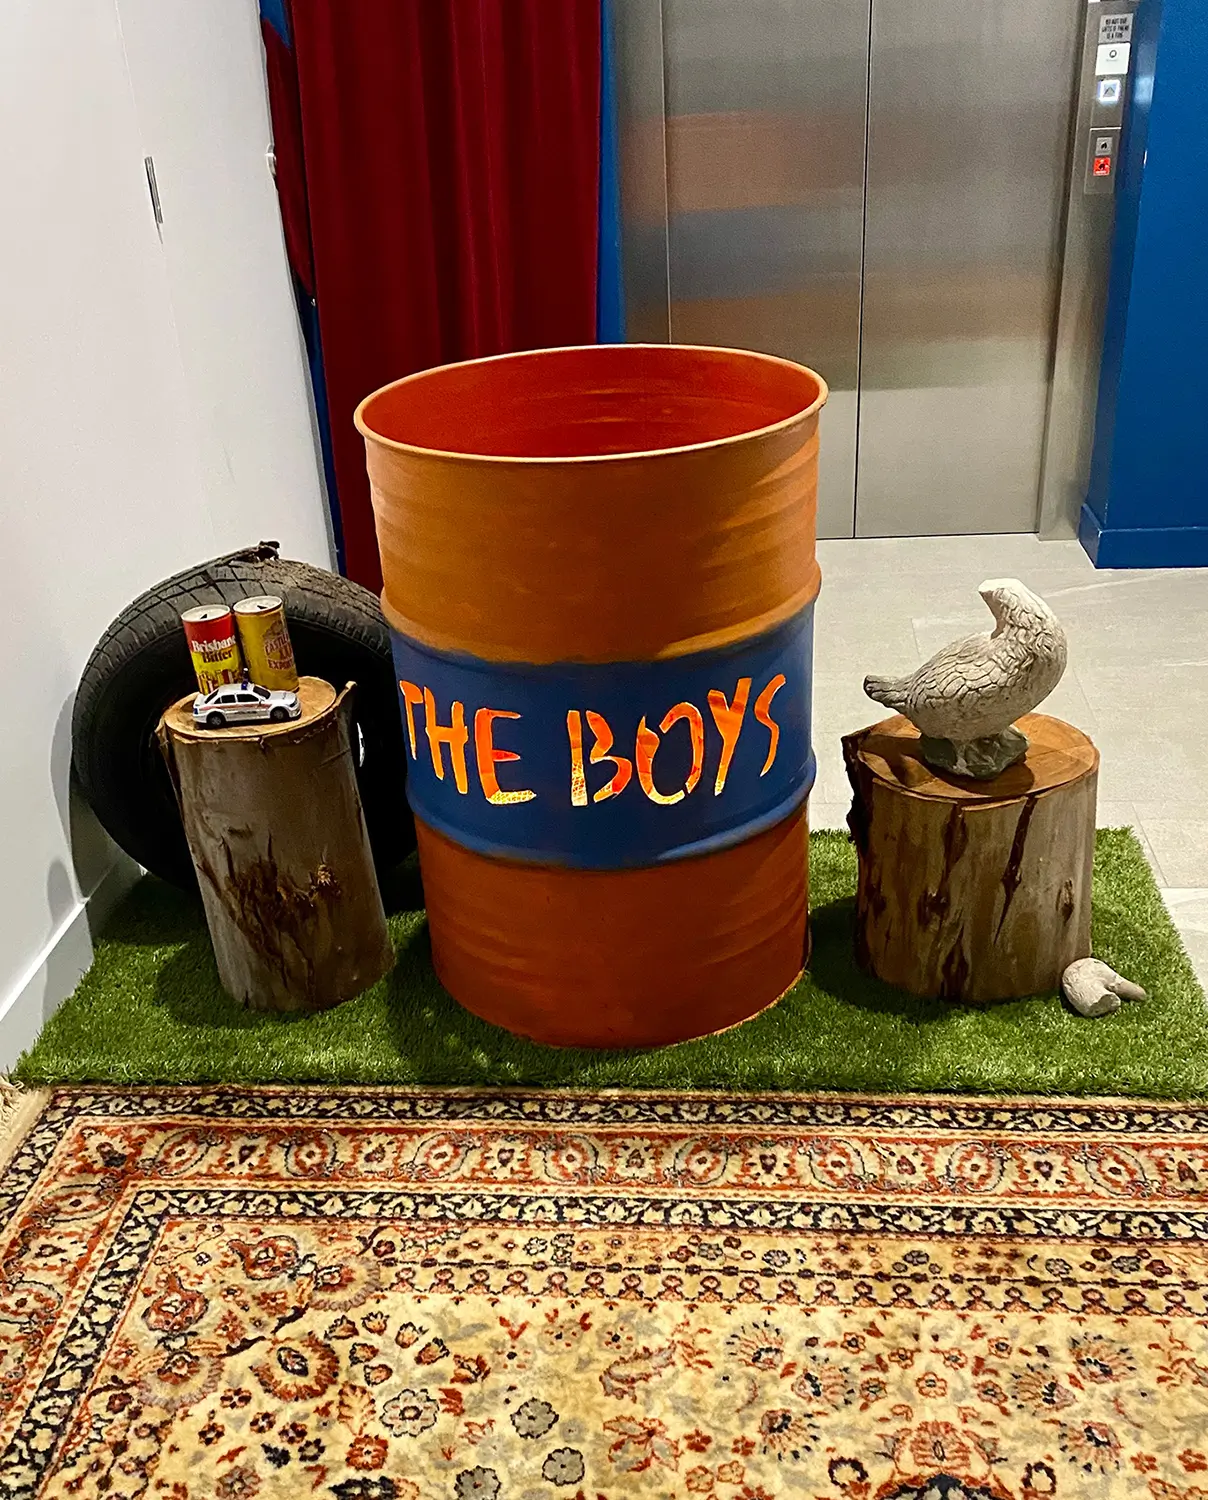 A steel barrel fire pit, an old tire, two tree stumps and other items inside a lobby